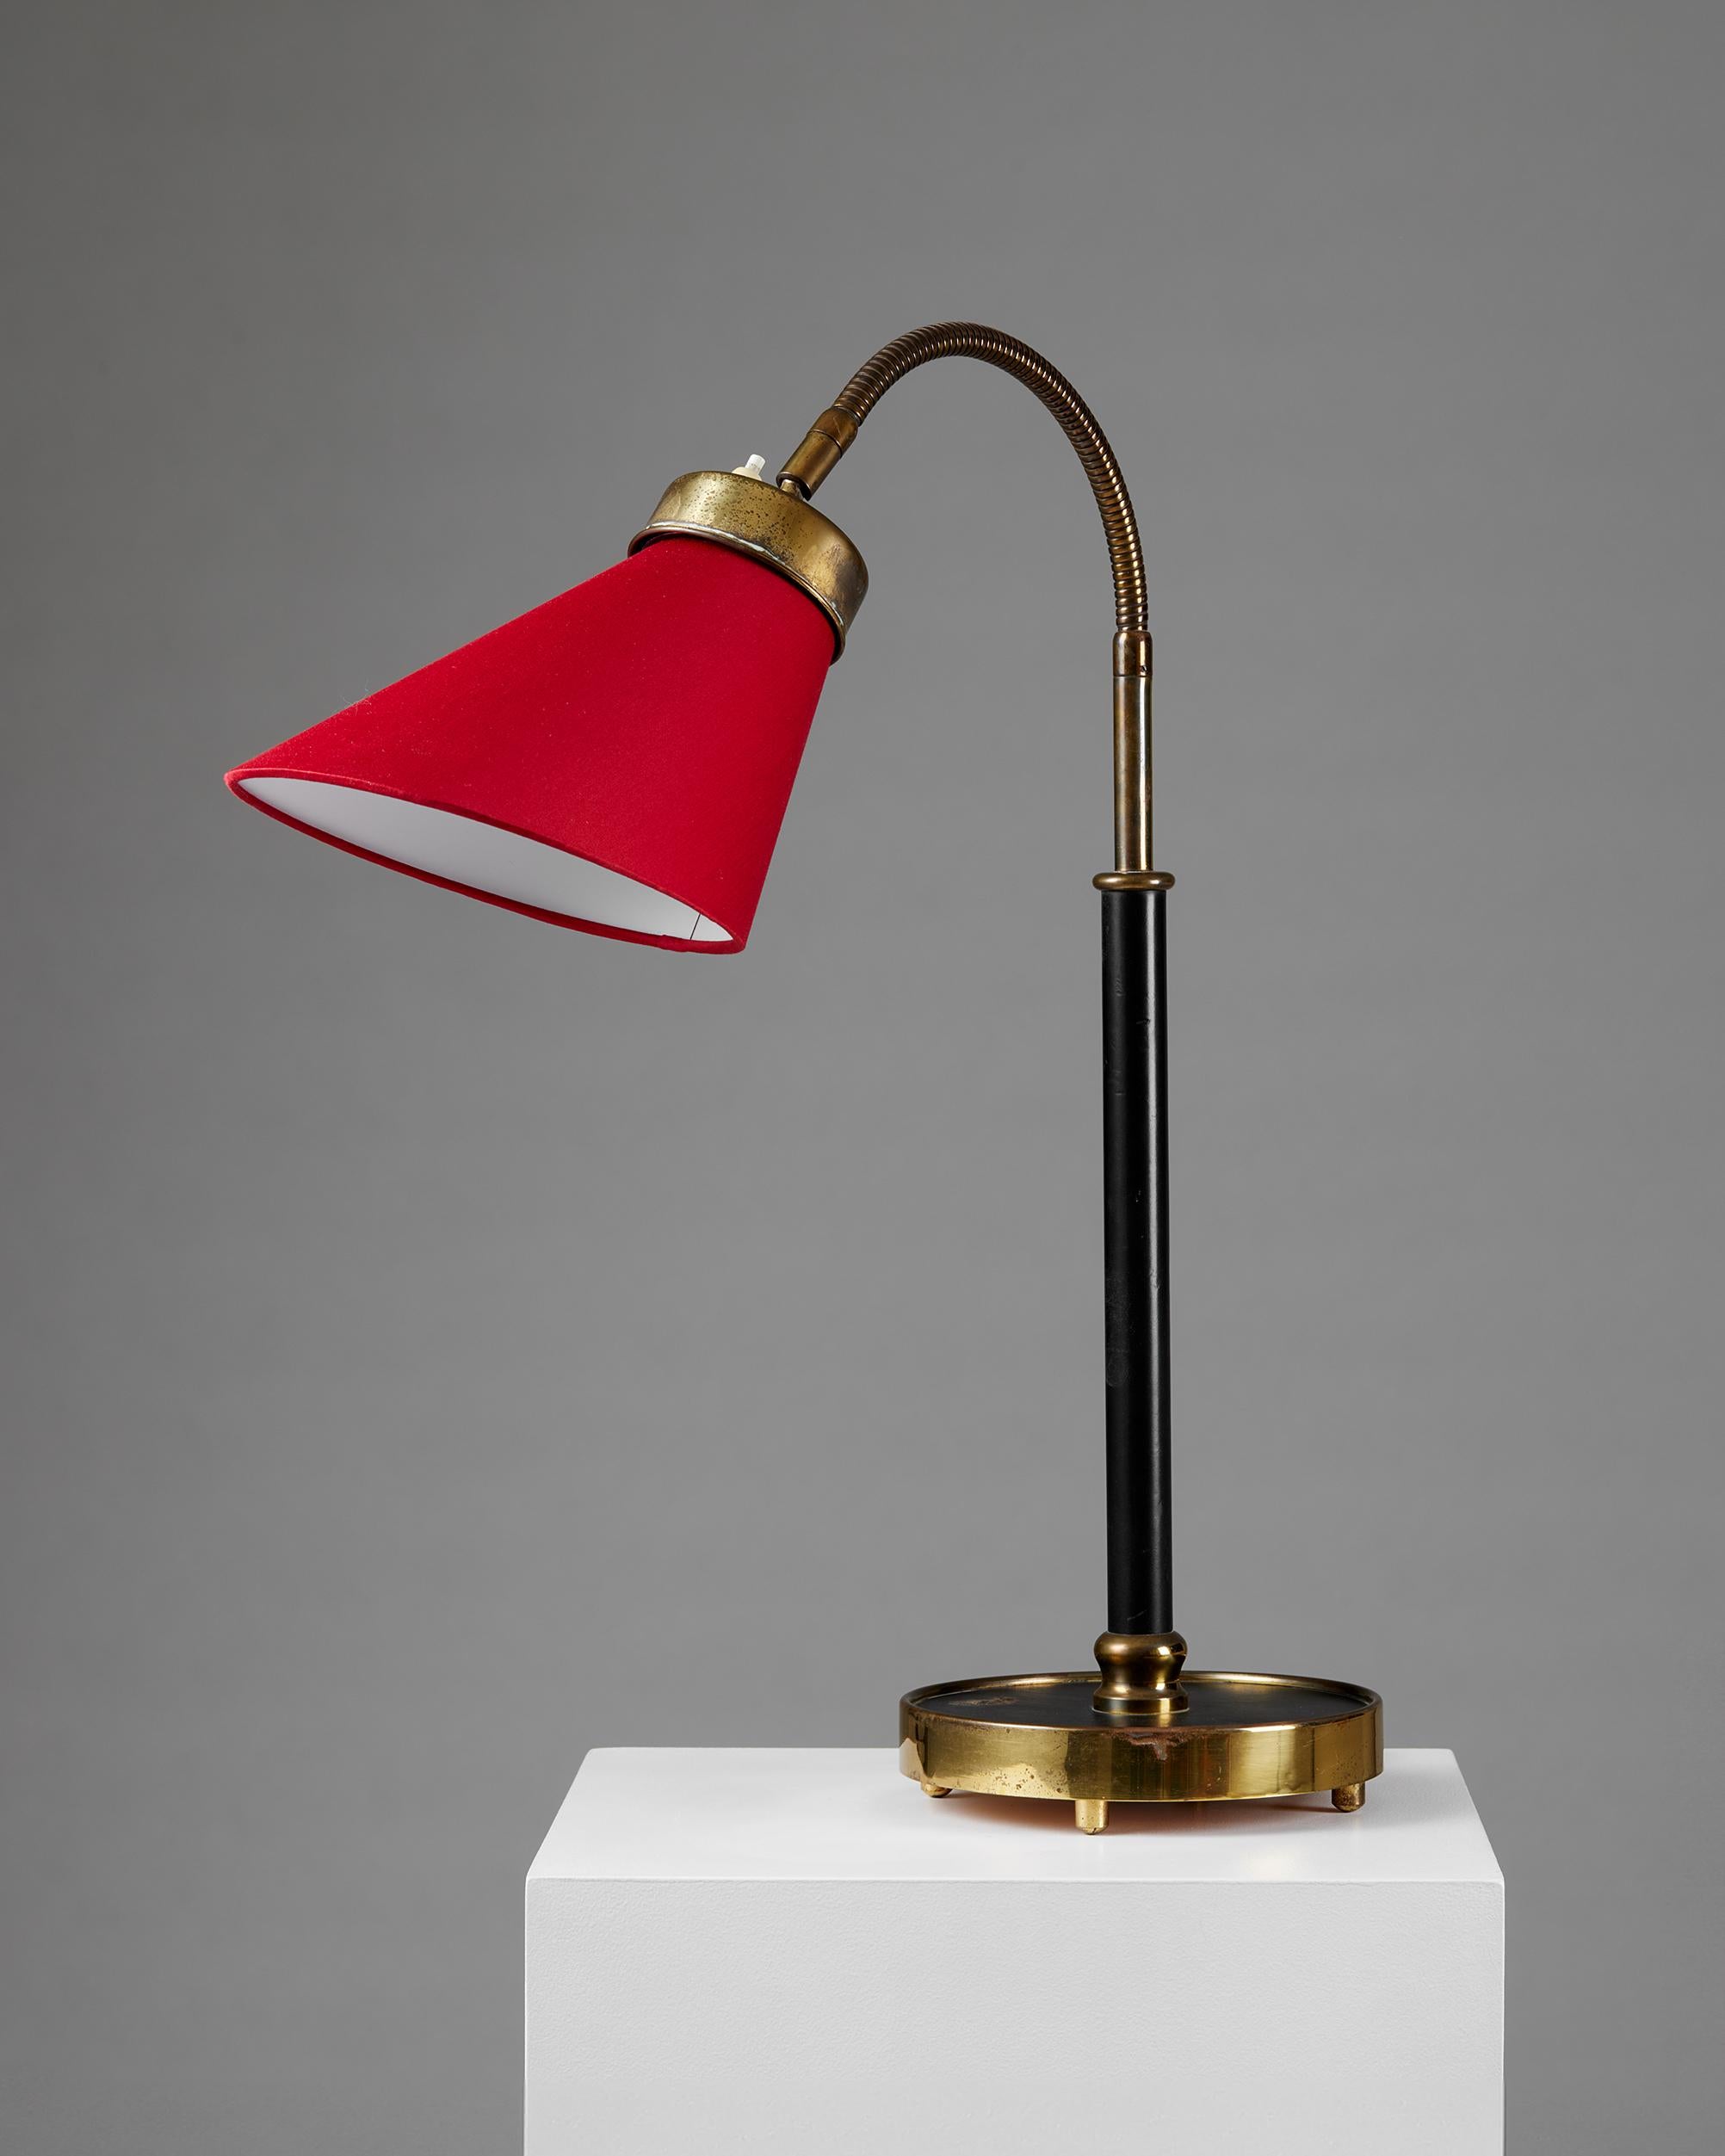 Table lamp model 2434 designed by Josef Frank for Svenskt Tenn,
Sweden, 1939.

Polished and lacquered brass, a leather-clad stem with a textile shade.

Stamped.

Josef Frank was a true European, he was also a pioneer of what would become classic